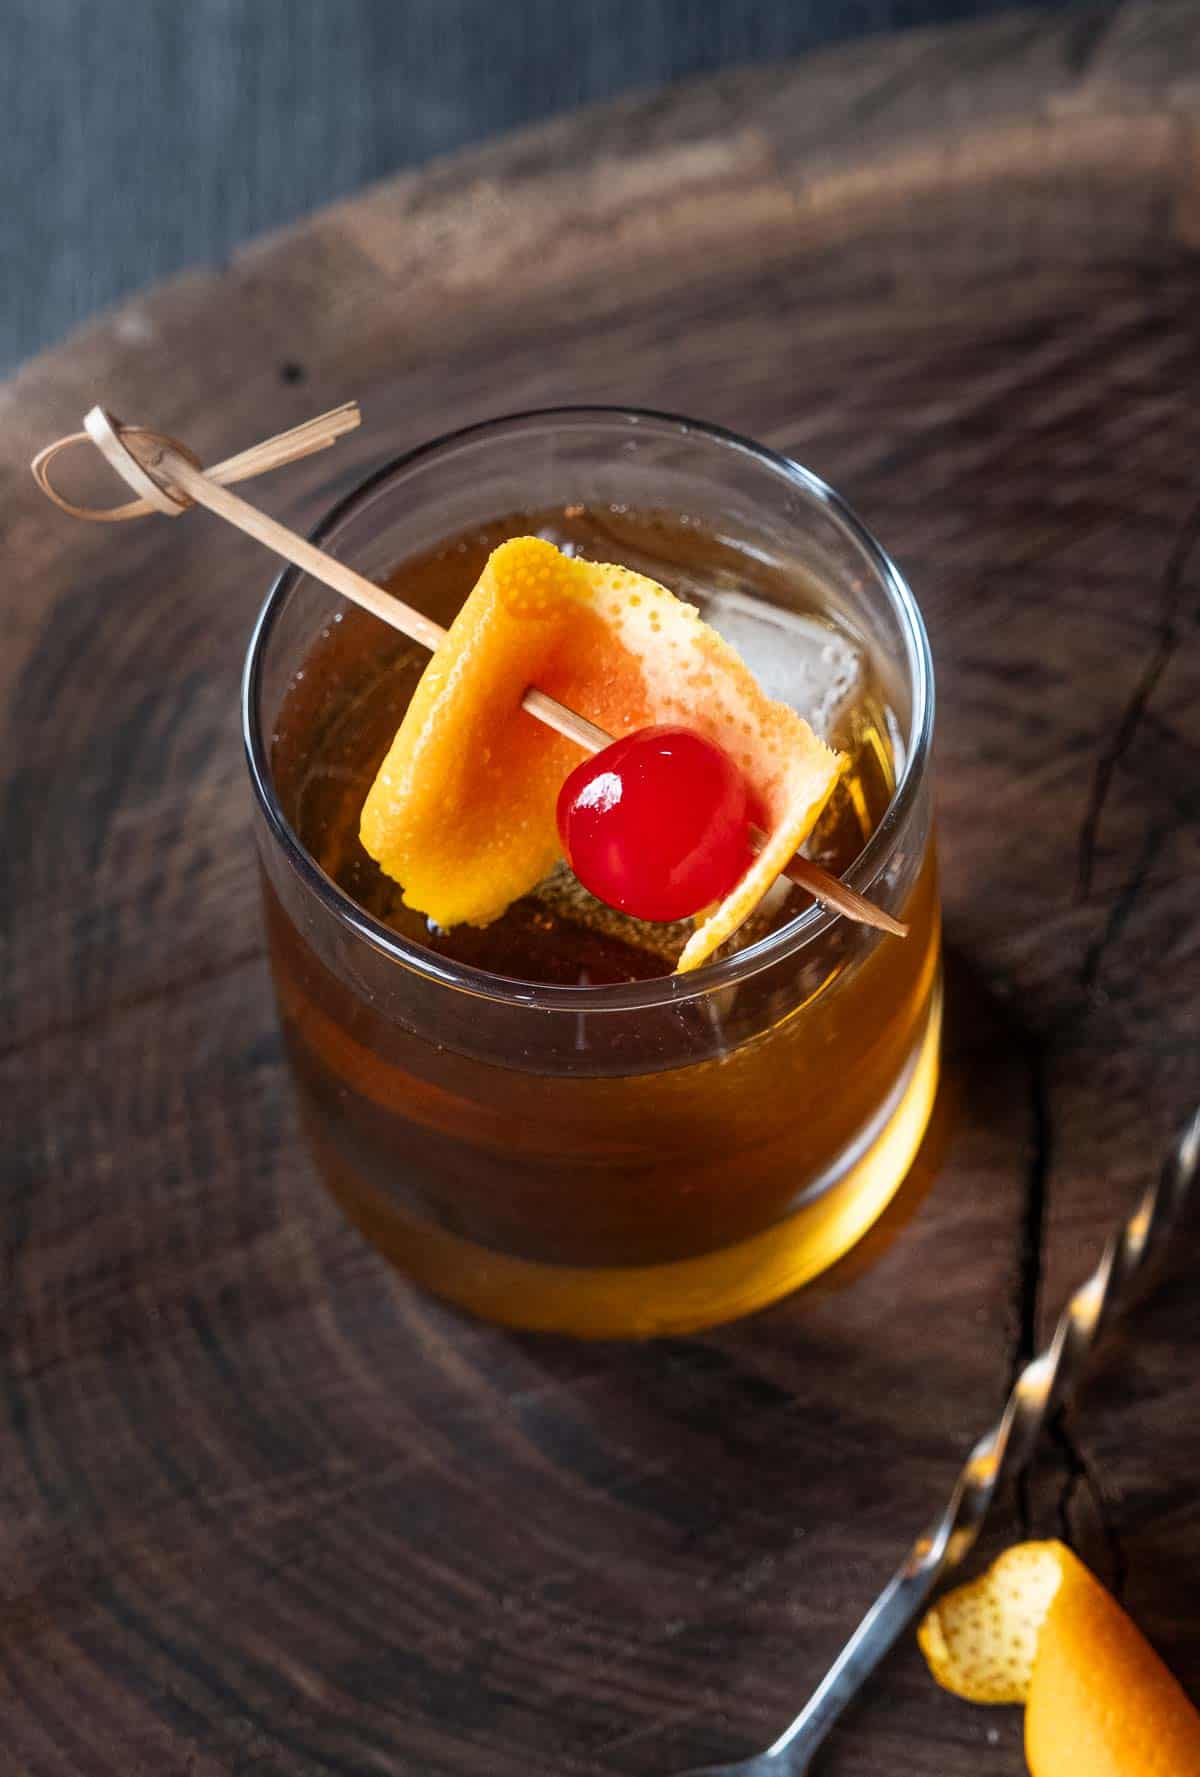 A smoked old fashioned cocktail garnished with a cocktail cherry and slice of orange in a rocks glass